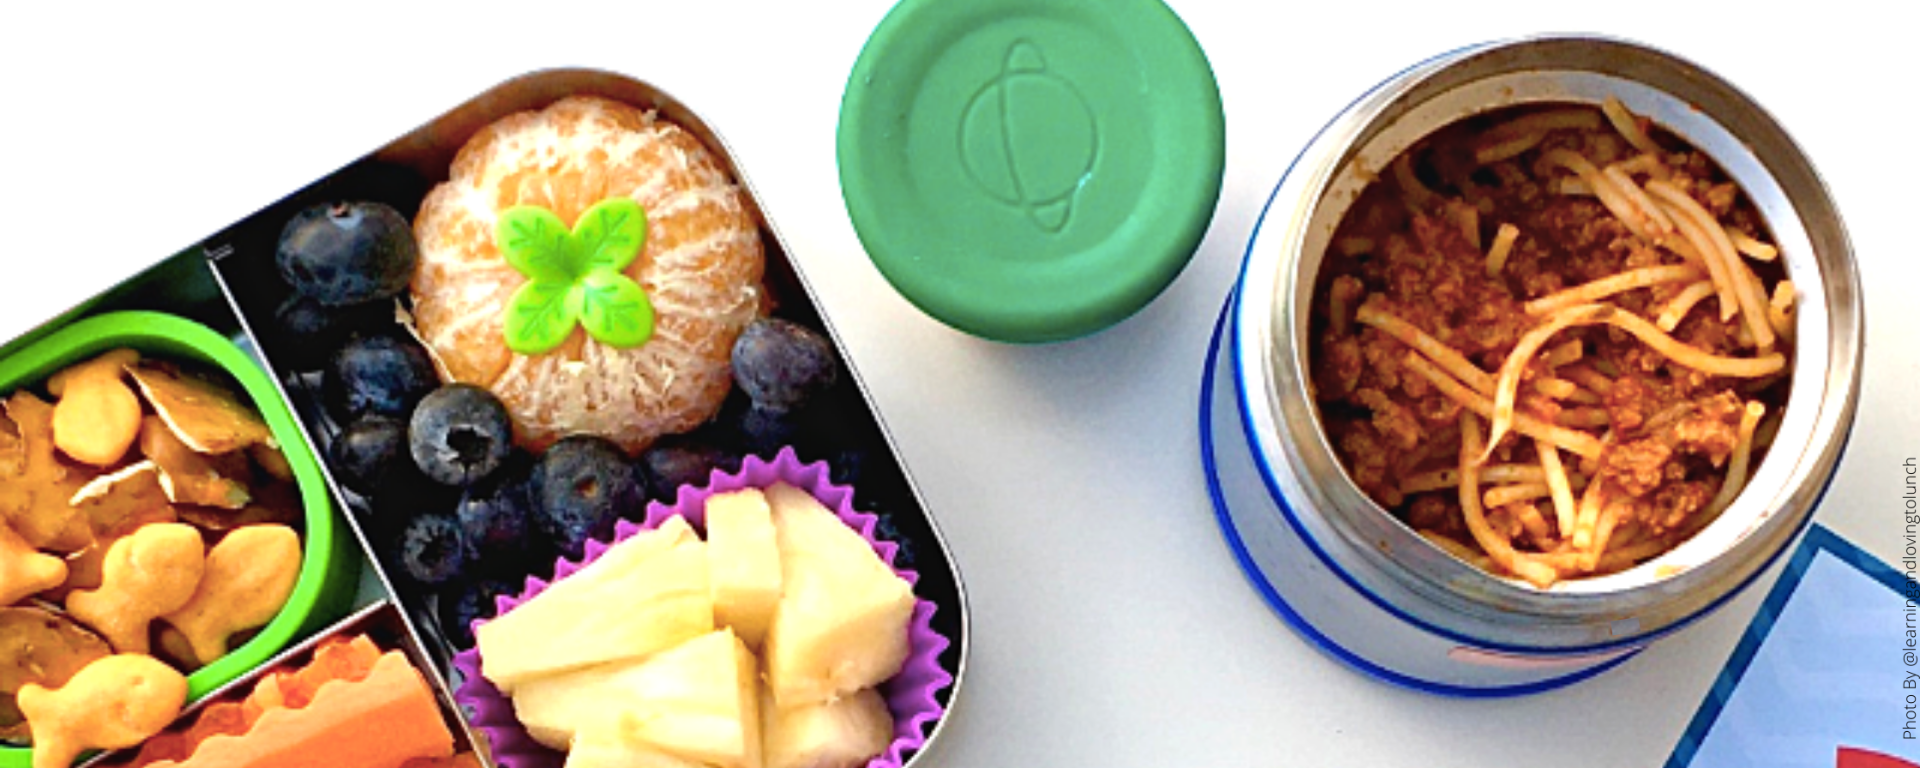  Kids Hot Lunch Containers